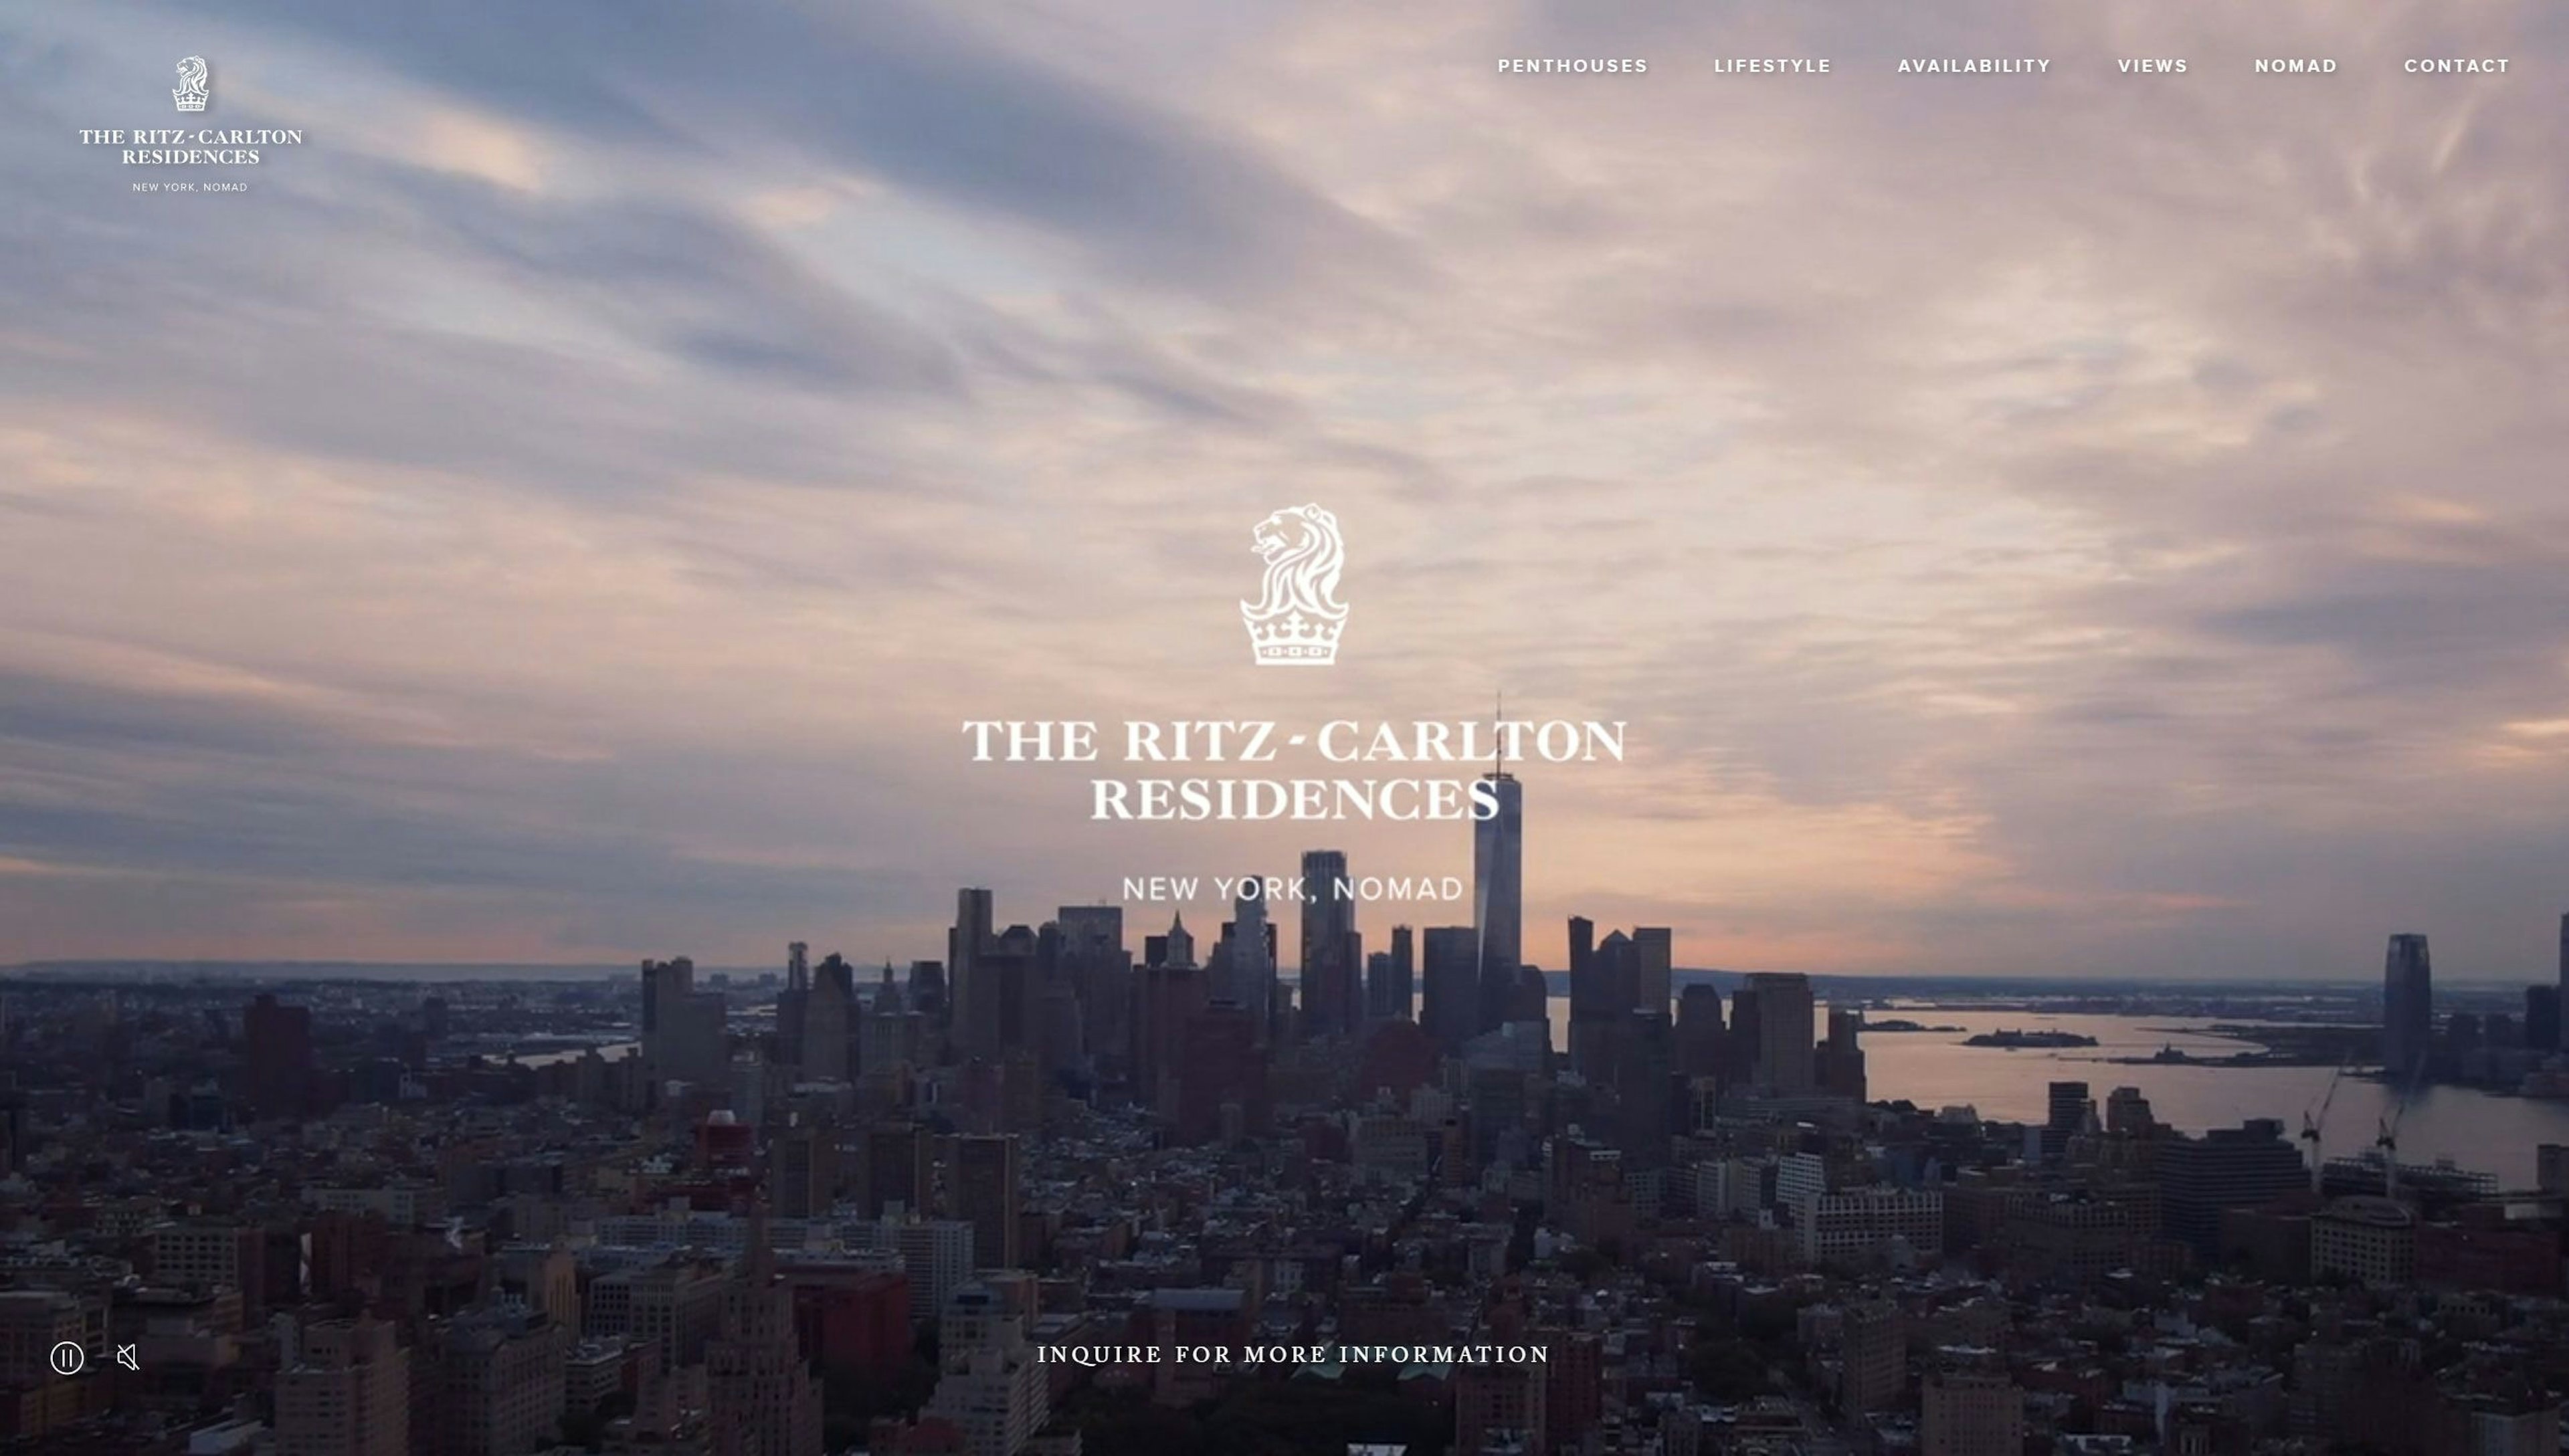 The New York skyline with the text "The Ritz-Carlton Residences"